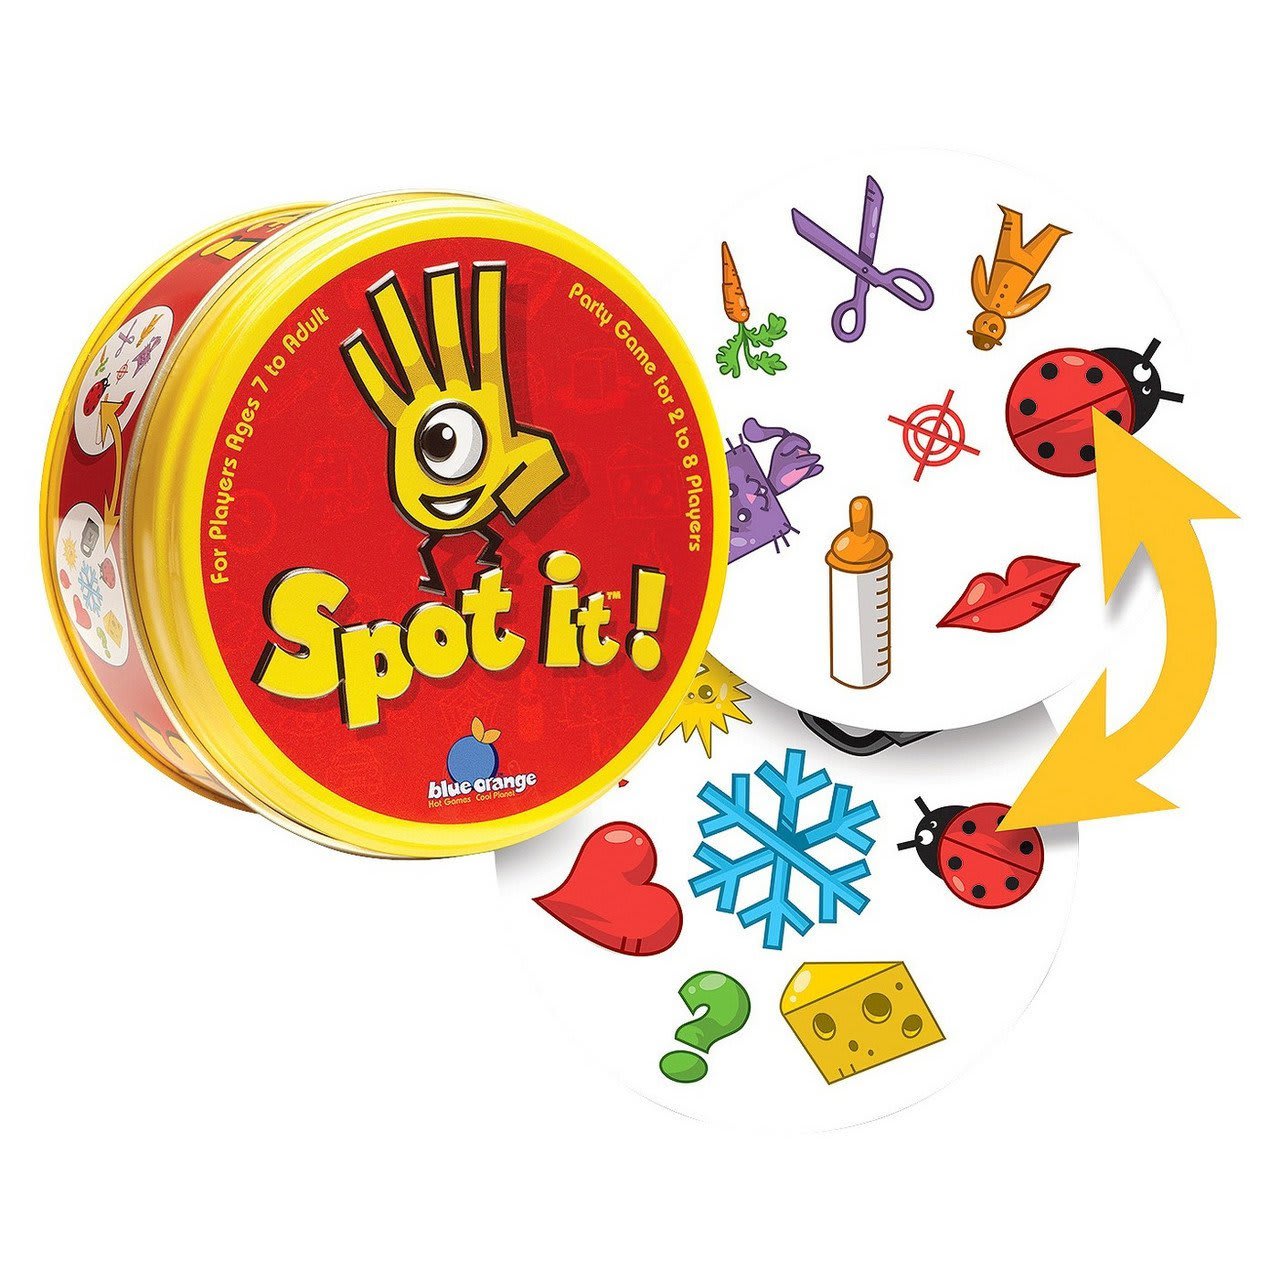 The Mind-Bending Math Behind Spot It!, the Beloved Family Card Game